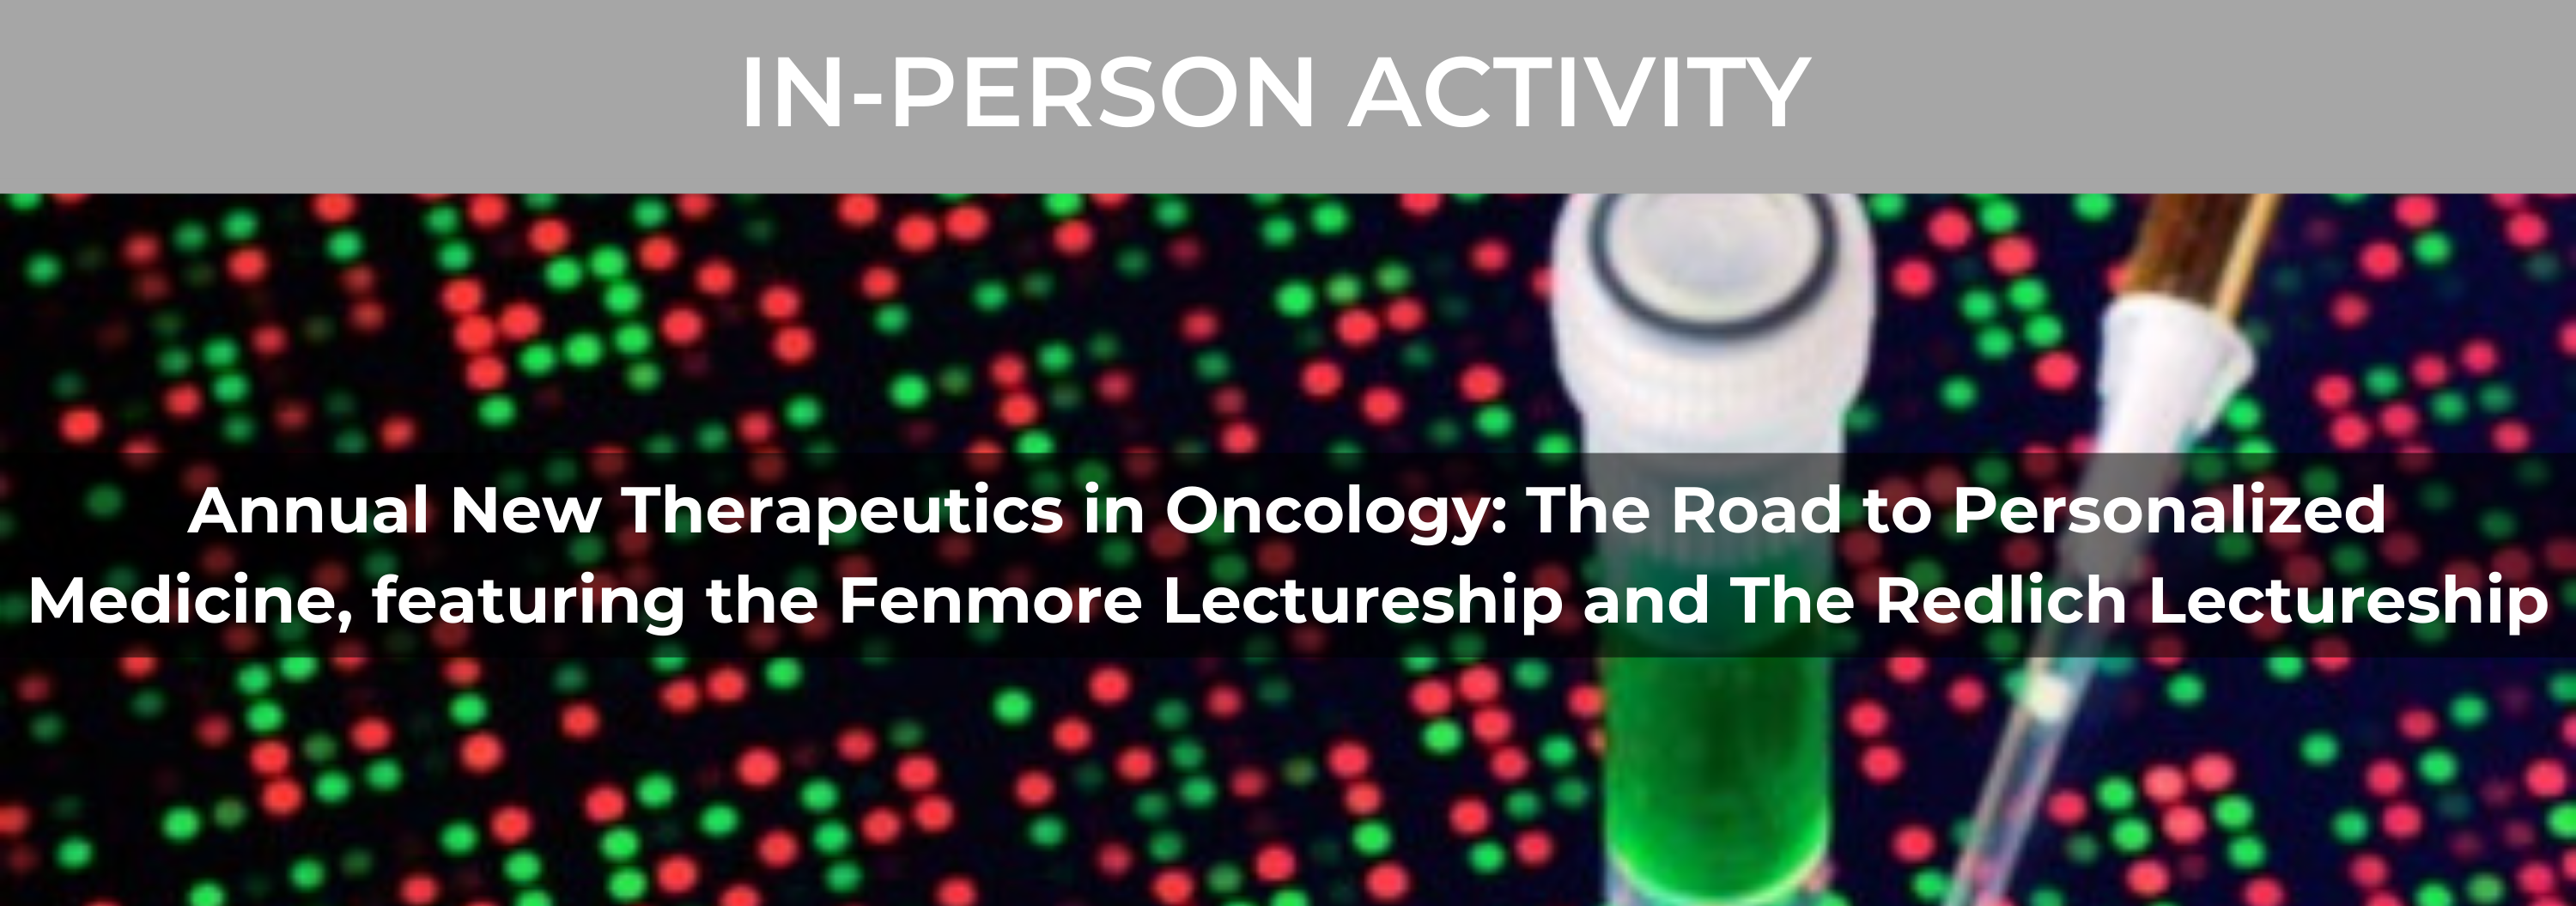 10th Annual New Therapeutics in Oncology: The Road to Personalized Medicine Featuring The Fenmore Lectureship and The Redlich Lectureship Banner